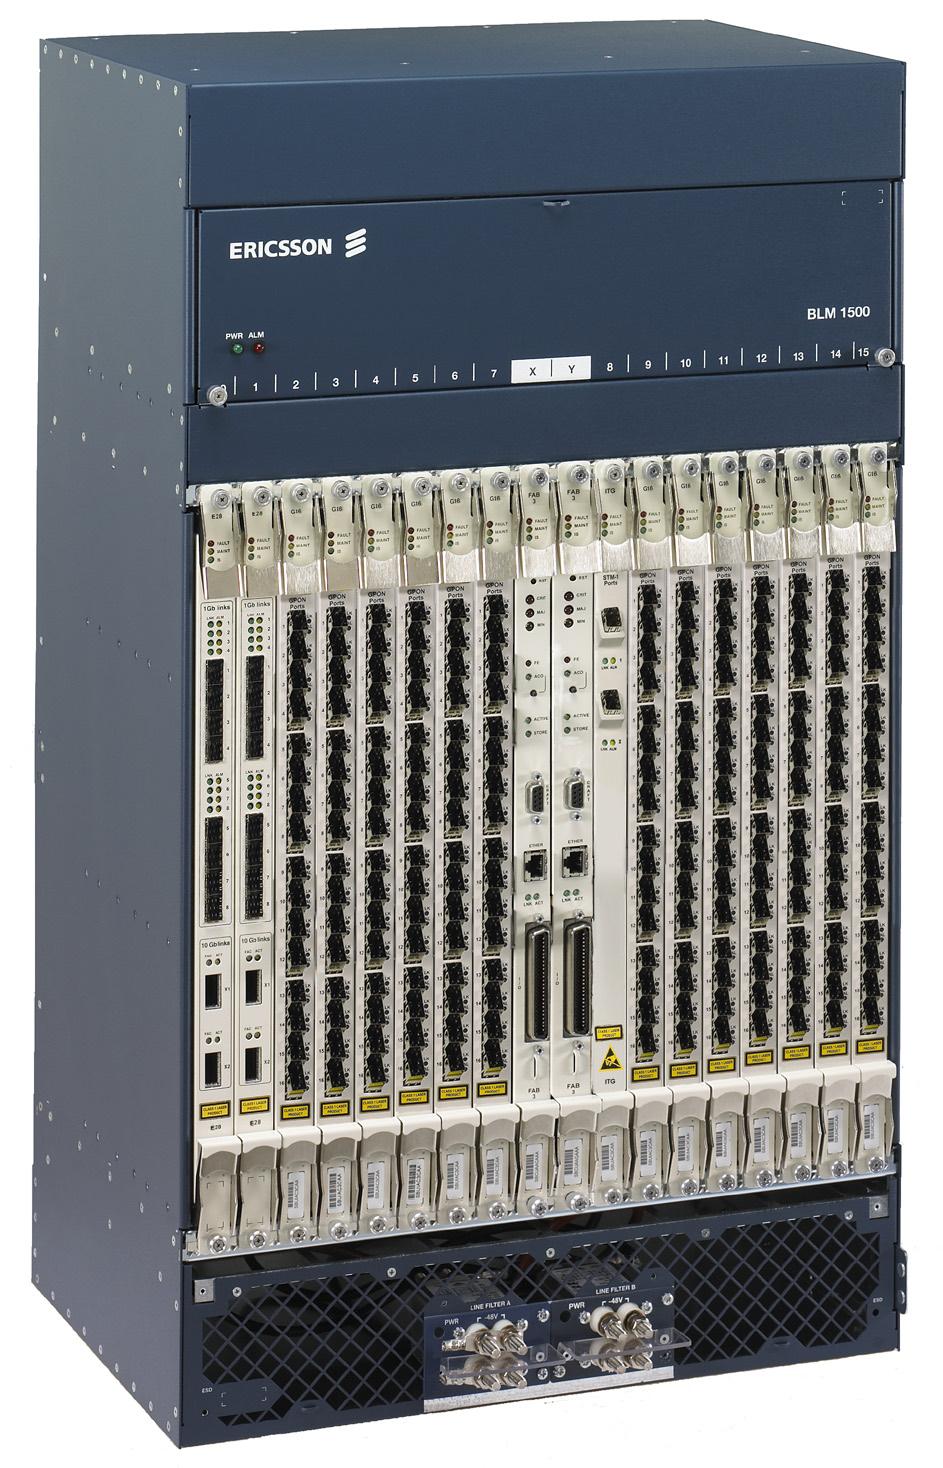 The 320 Gbps switching capacity, both under normal conditions and after failover, features a dual star architecture with dedicated 20 Gbps data traces between each FABX/Y control card slot and all